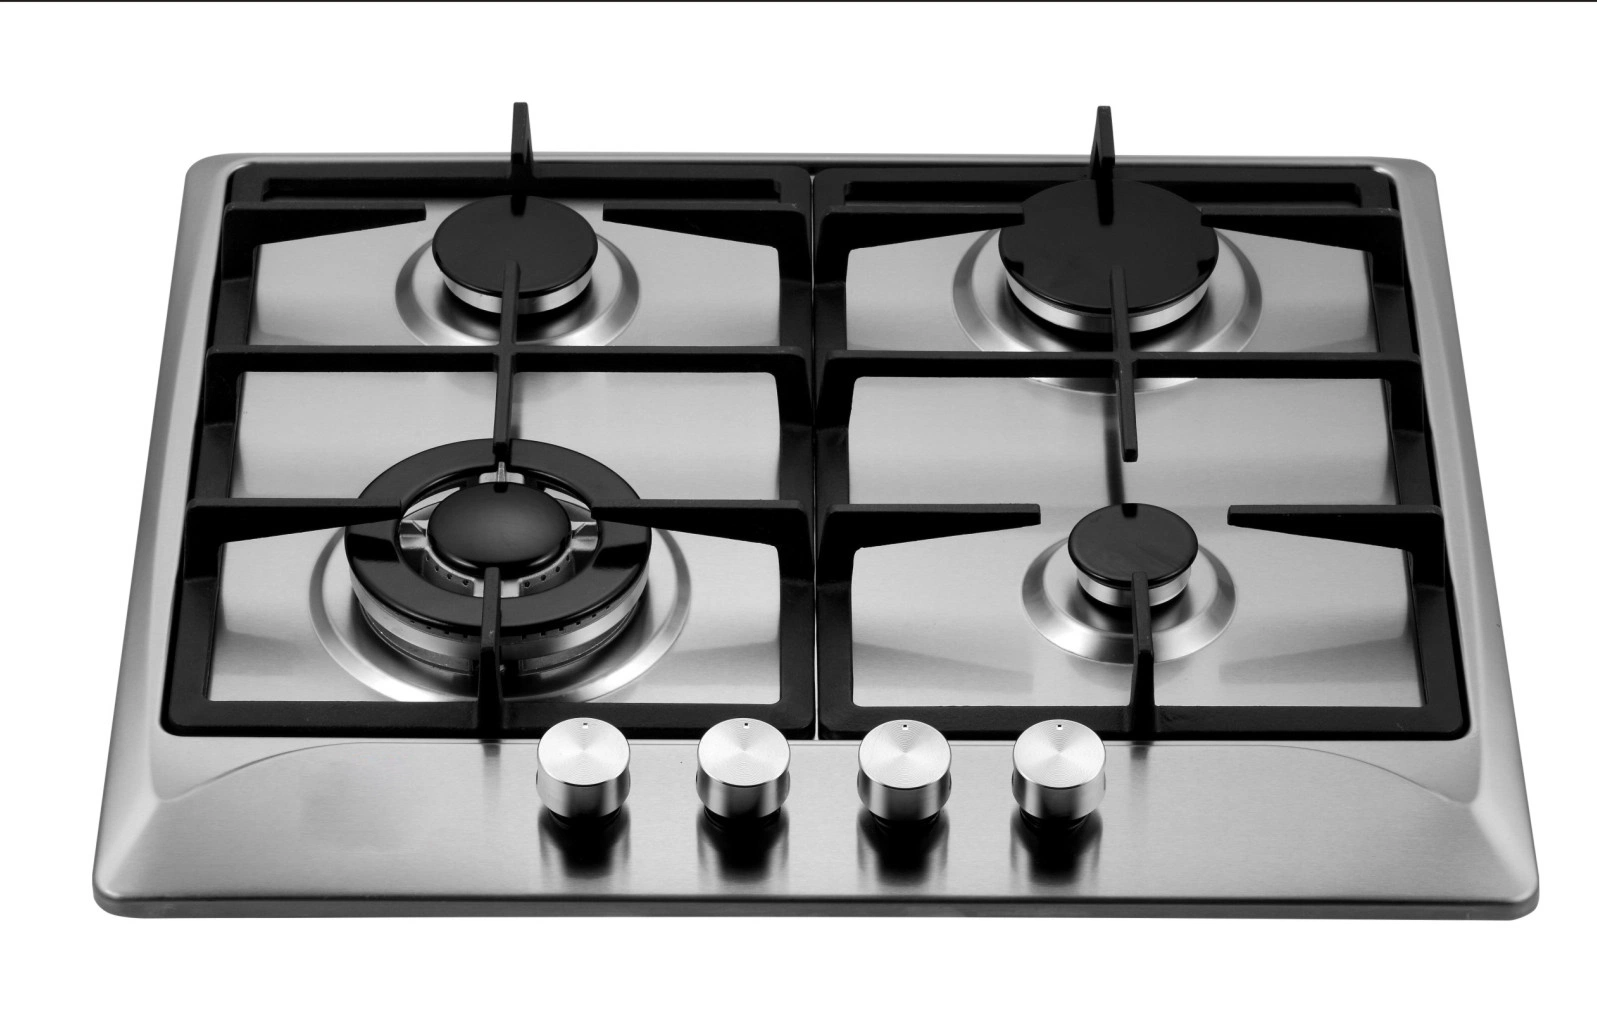 600mm Series Build in Gas Hob 4 Burner Kitchen Cooker Gas Cast Iron Electric Hob